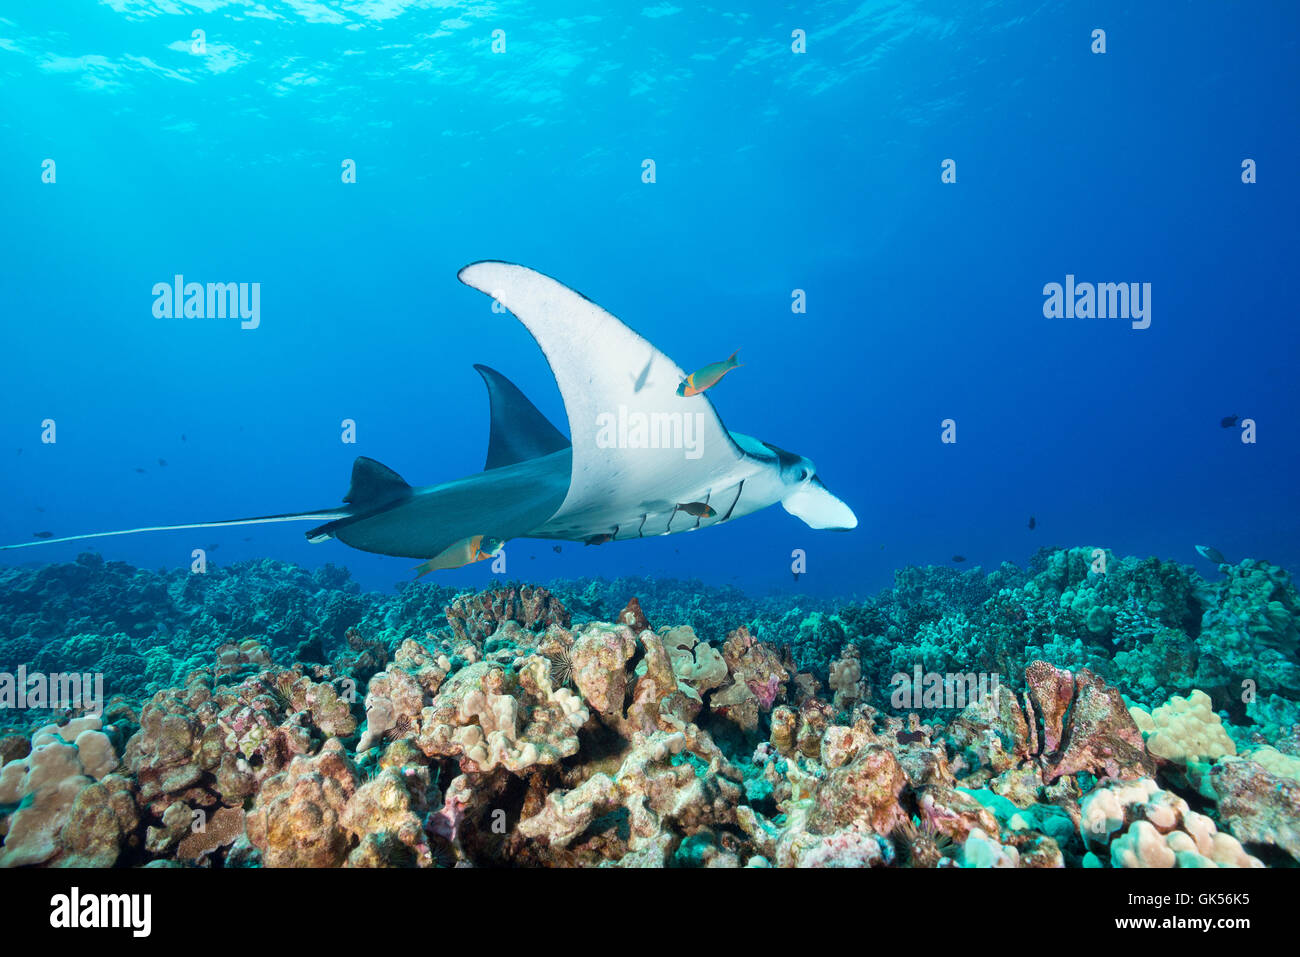 a reef manta ray, Manta alfredi, is cleaned by saddle wrasses, Thalassoma duperrey, an endemic species, Kona, Hawaii Stock Photo